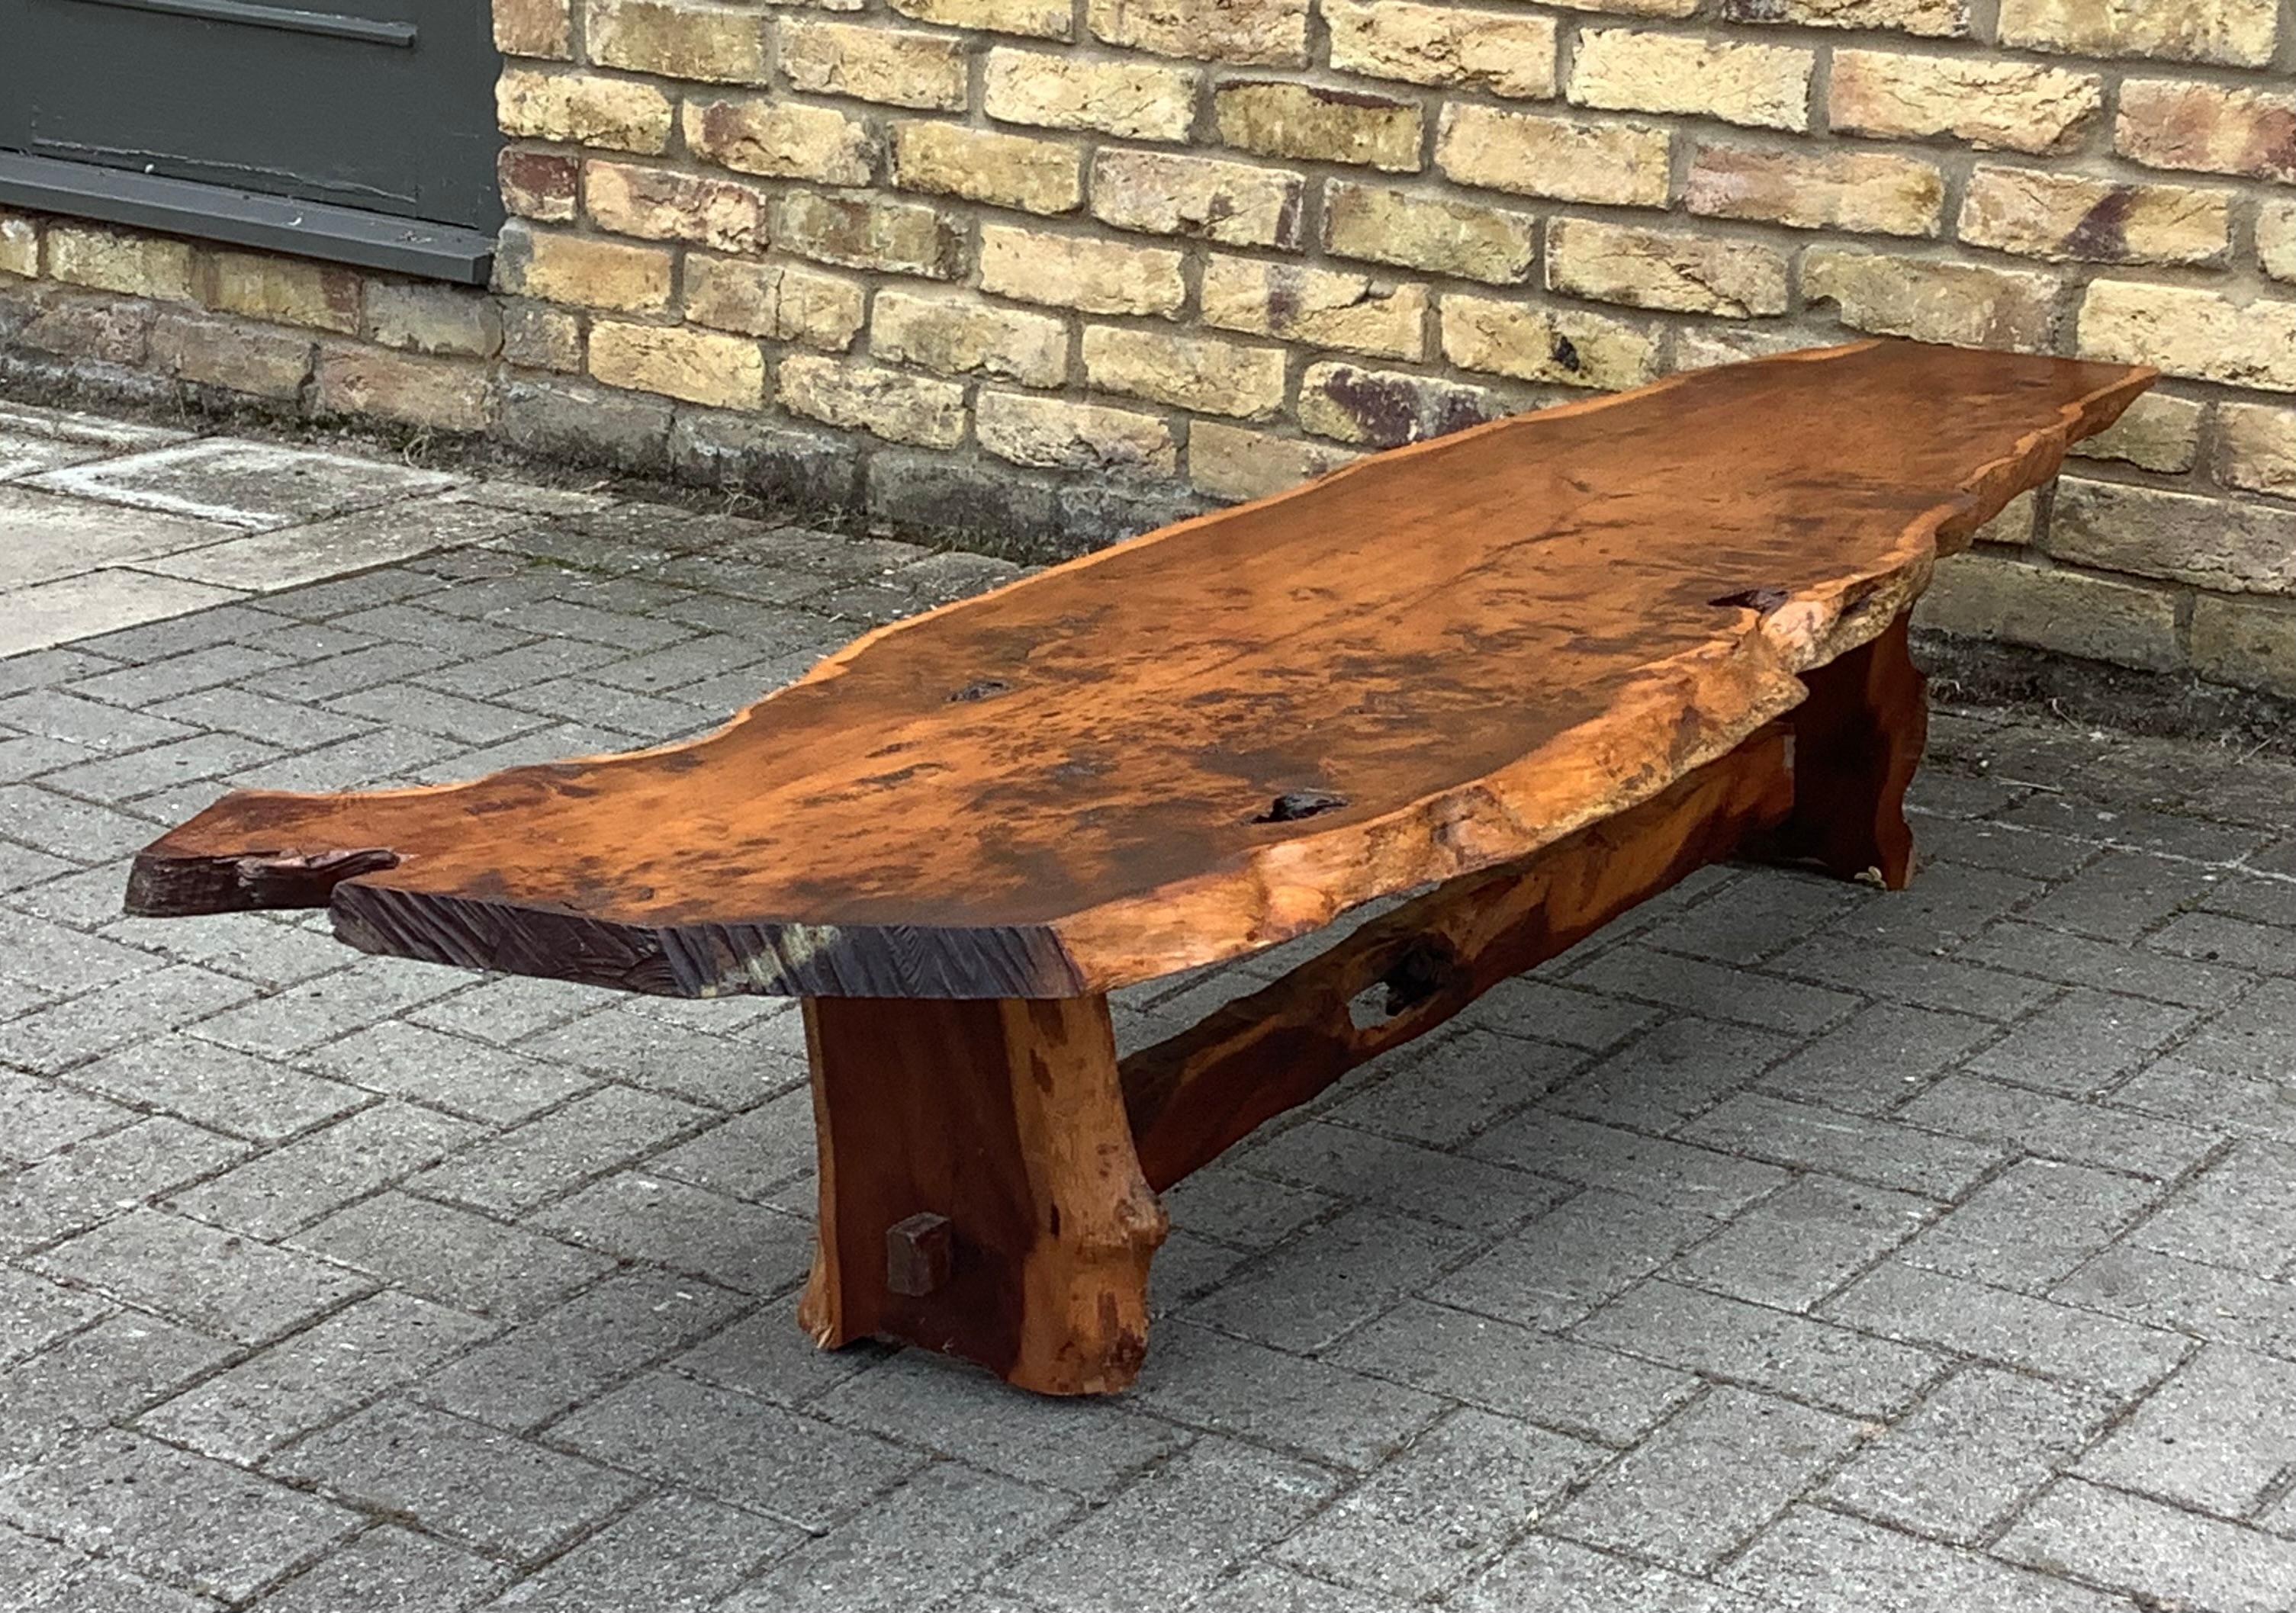 Low stylist coffee table in beautiful Yew wood in the style of the iconic 
designer George nakashima Cc 1960